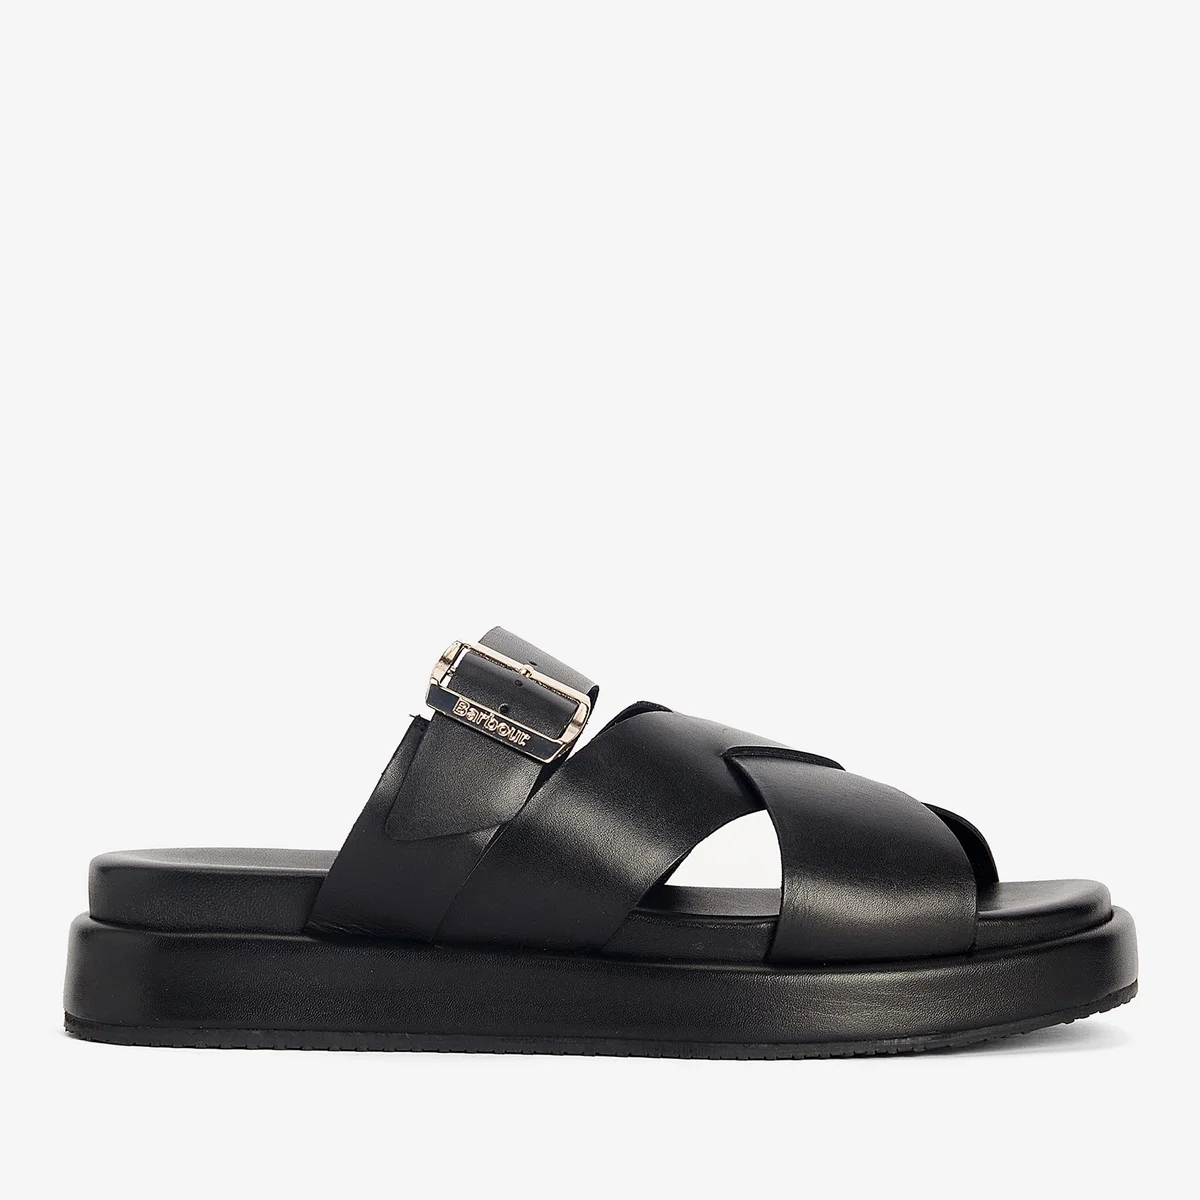 Barbour Women's Annalise Leather Sandals Image 1